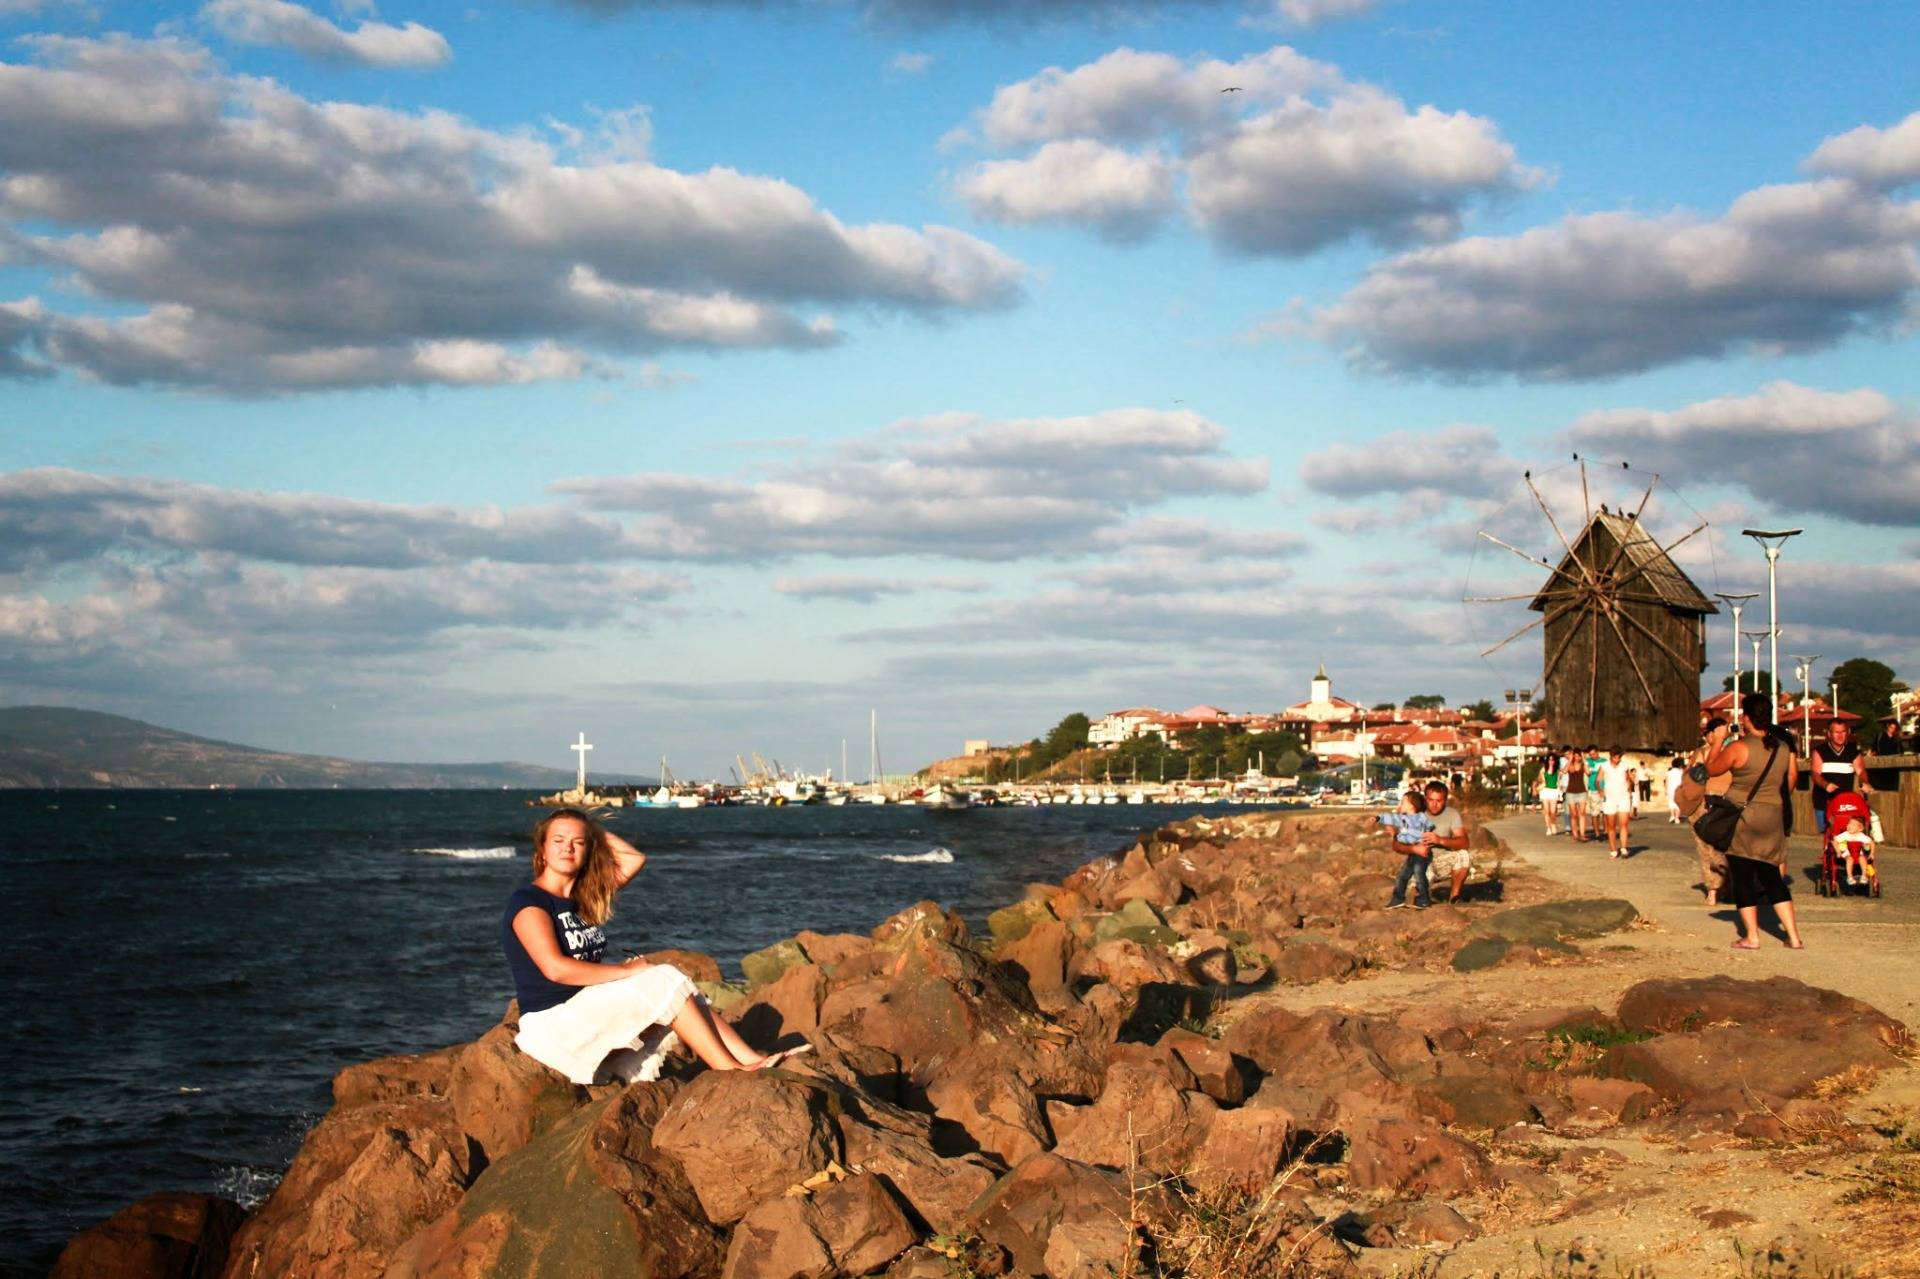 My vacation in Nessebar